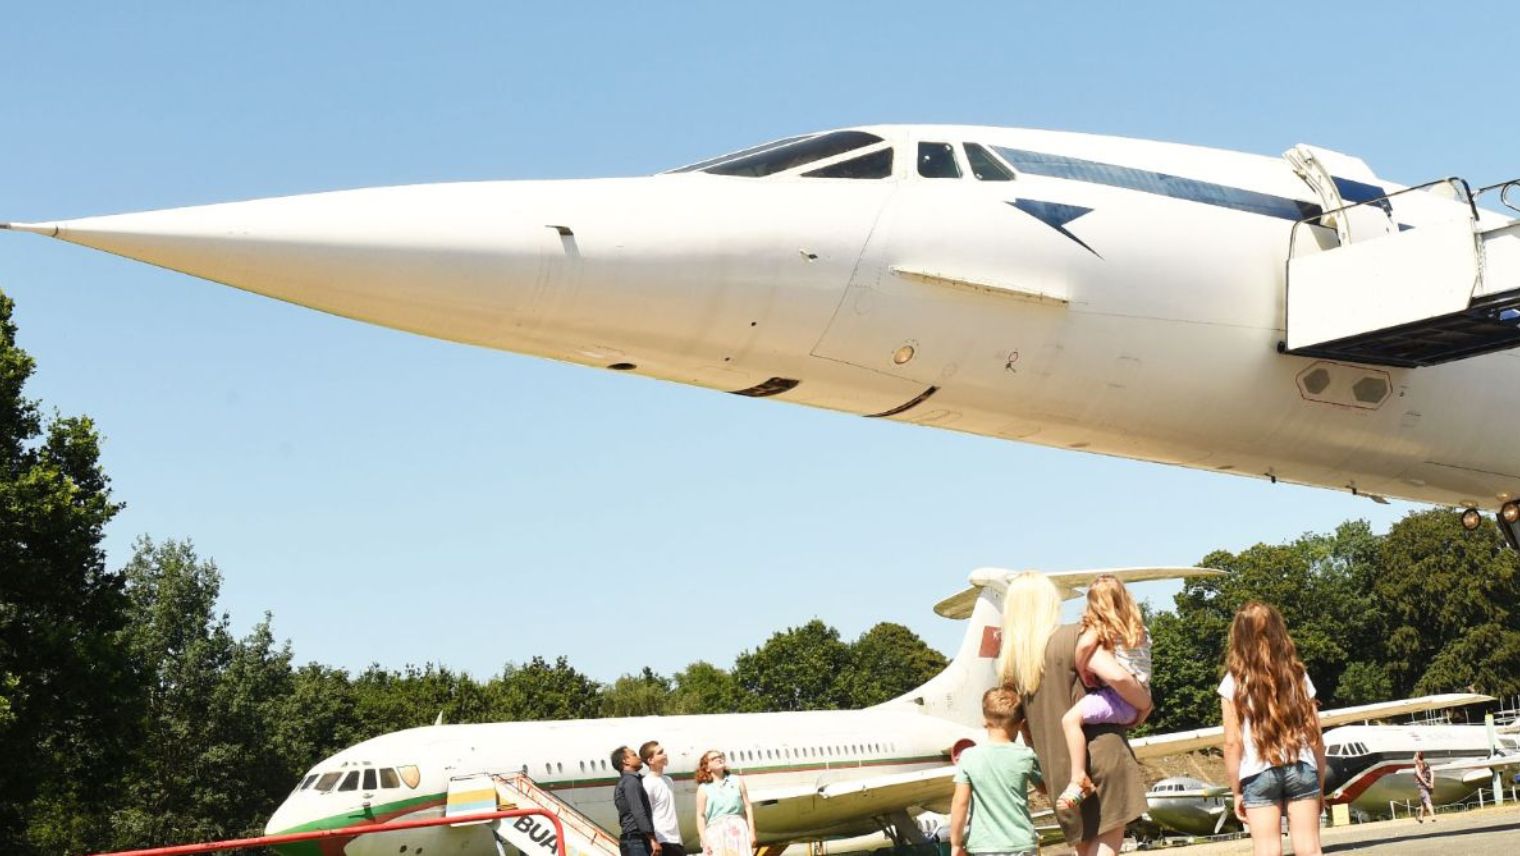 Visit Brooklands Museum and go on board a Concorde airplane